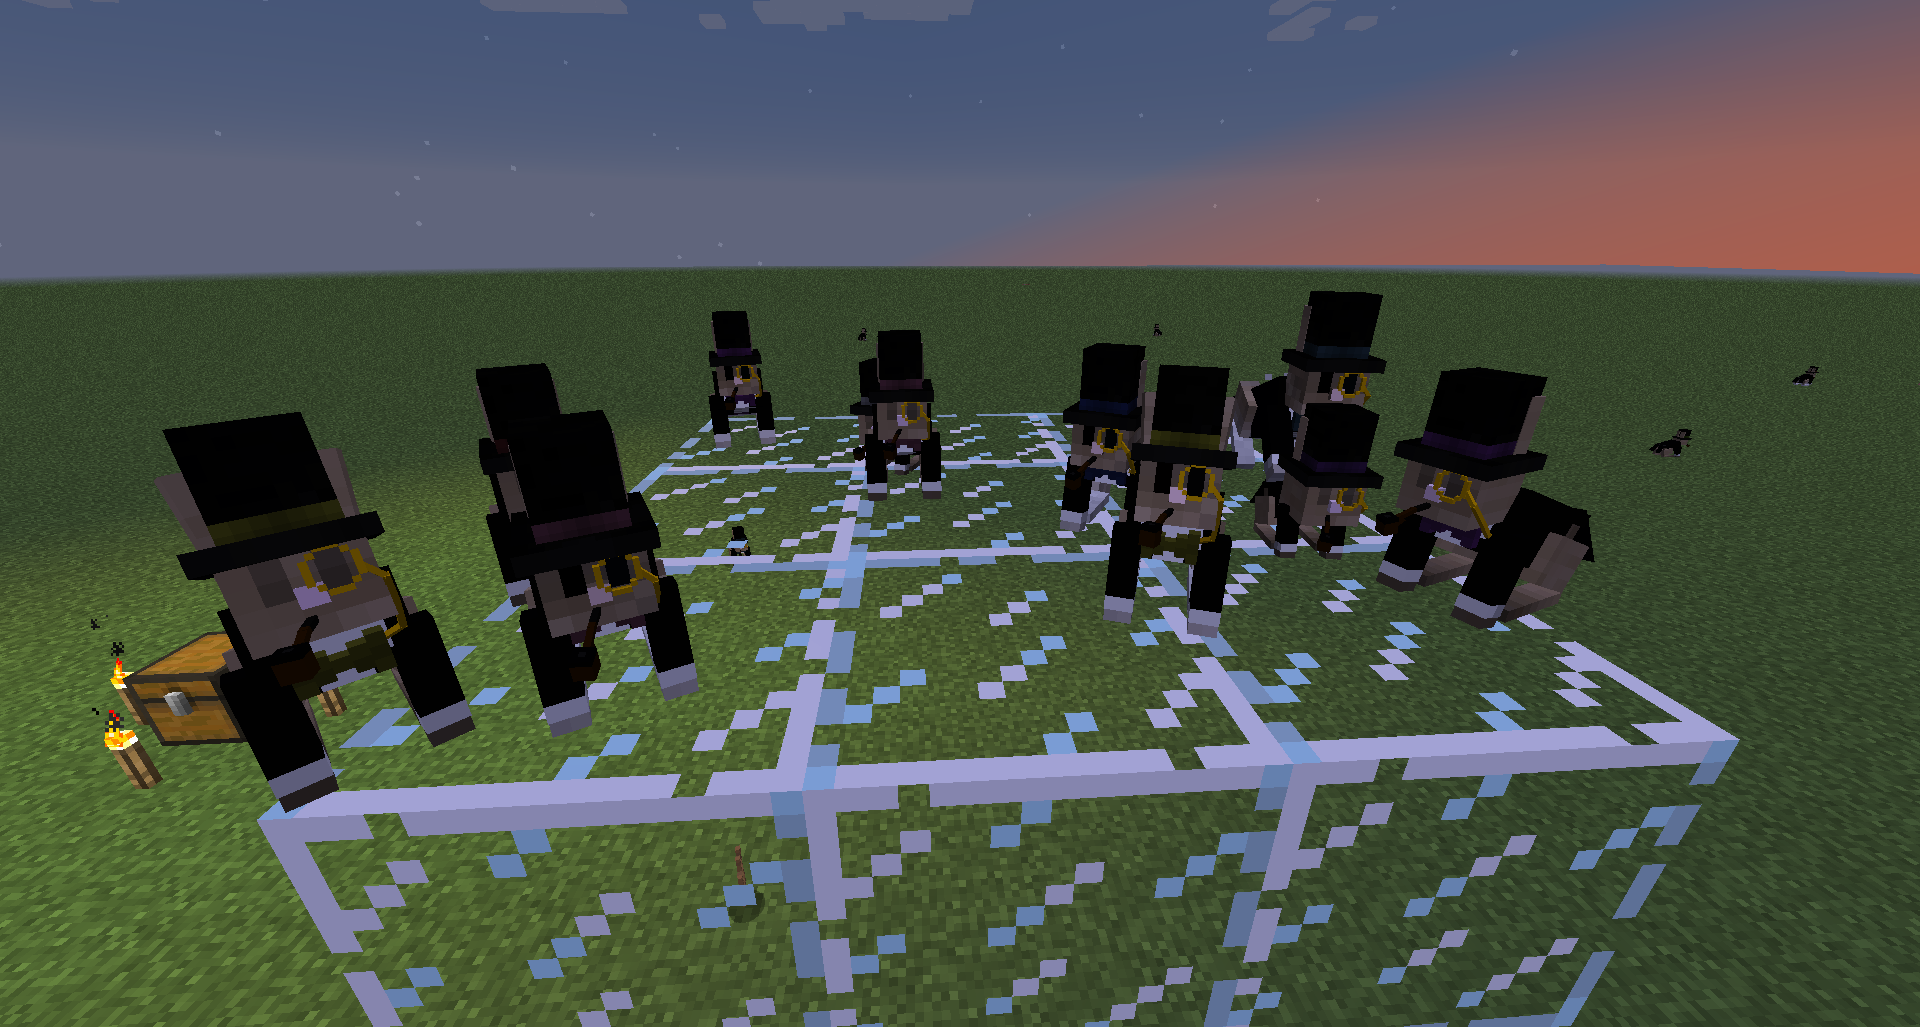 A number of rabbits are on a small glass platform and fully dressed in a suit, complete with bow tie, pipe, monocle and top hat. The bow tie and top hat have various colors following Minecraft dyes